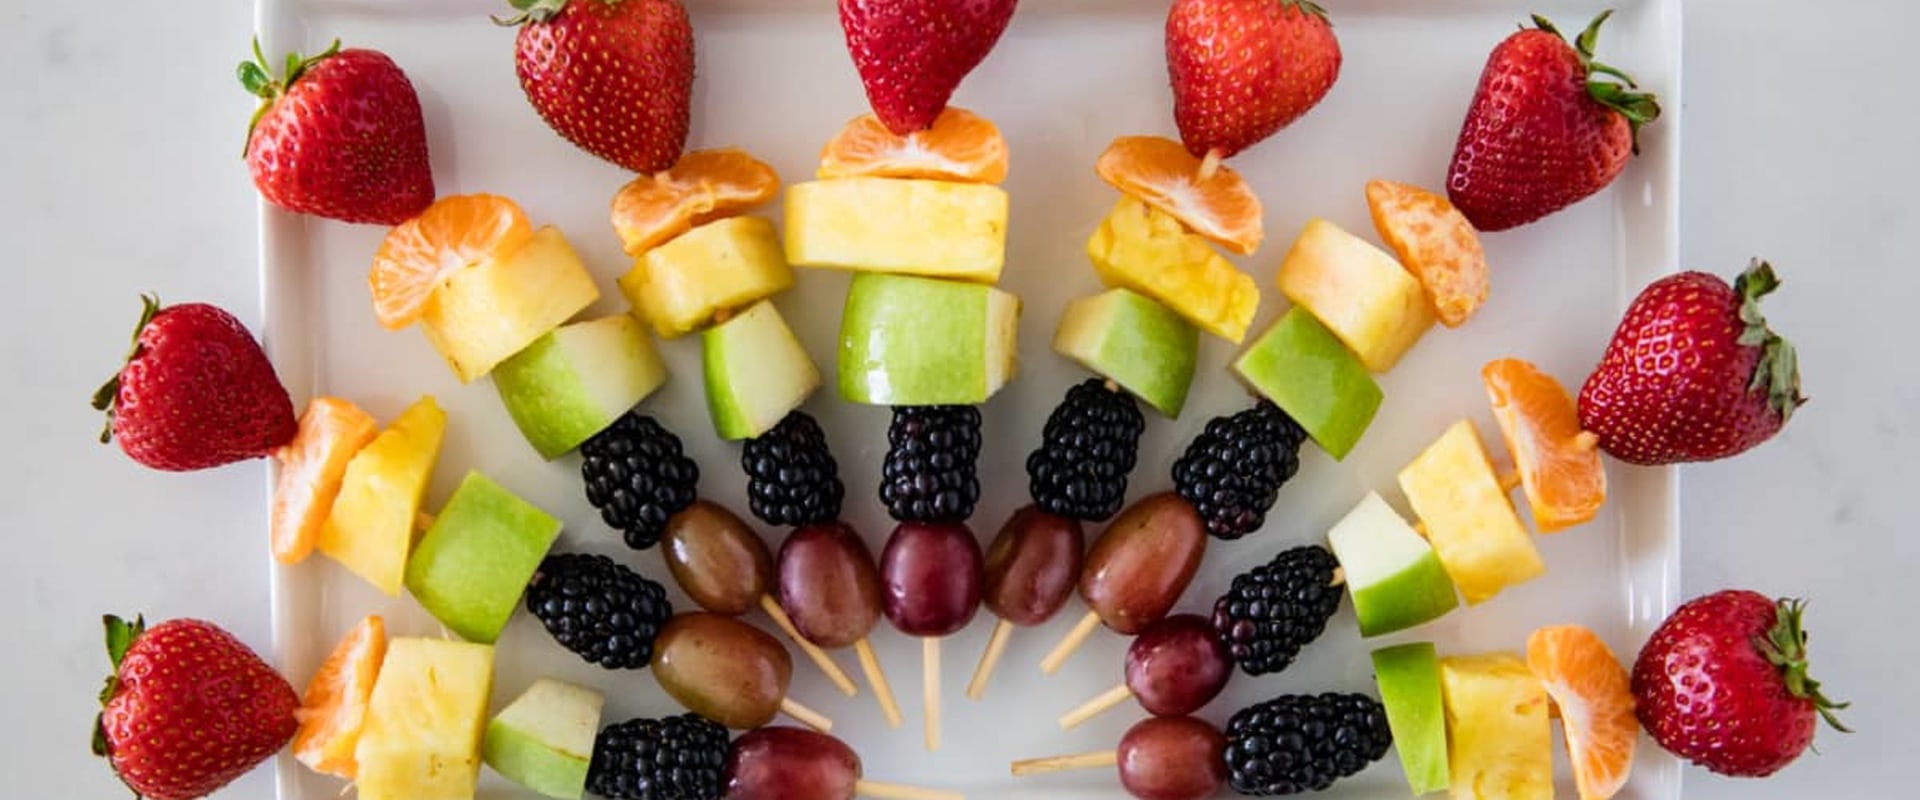 How to Make Delicious Fruit-Based Appetizers